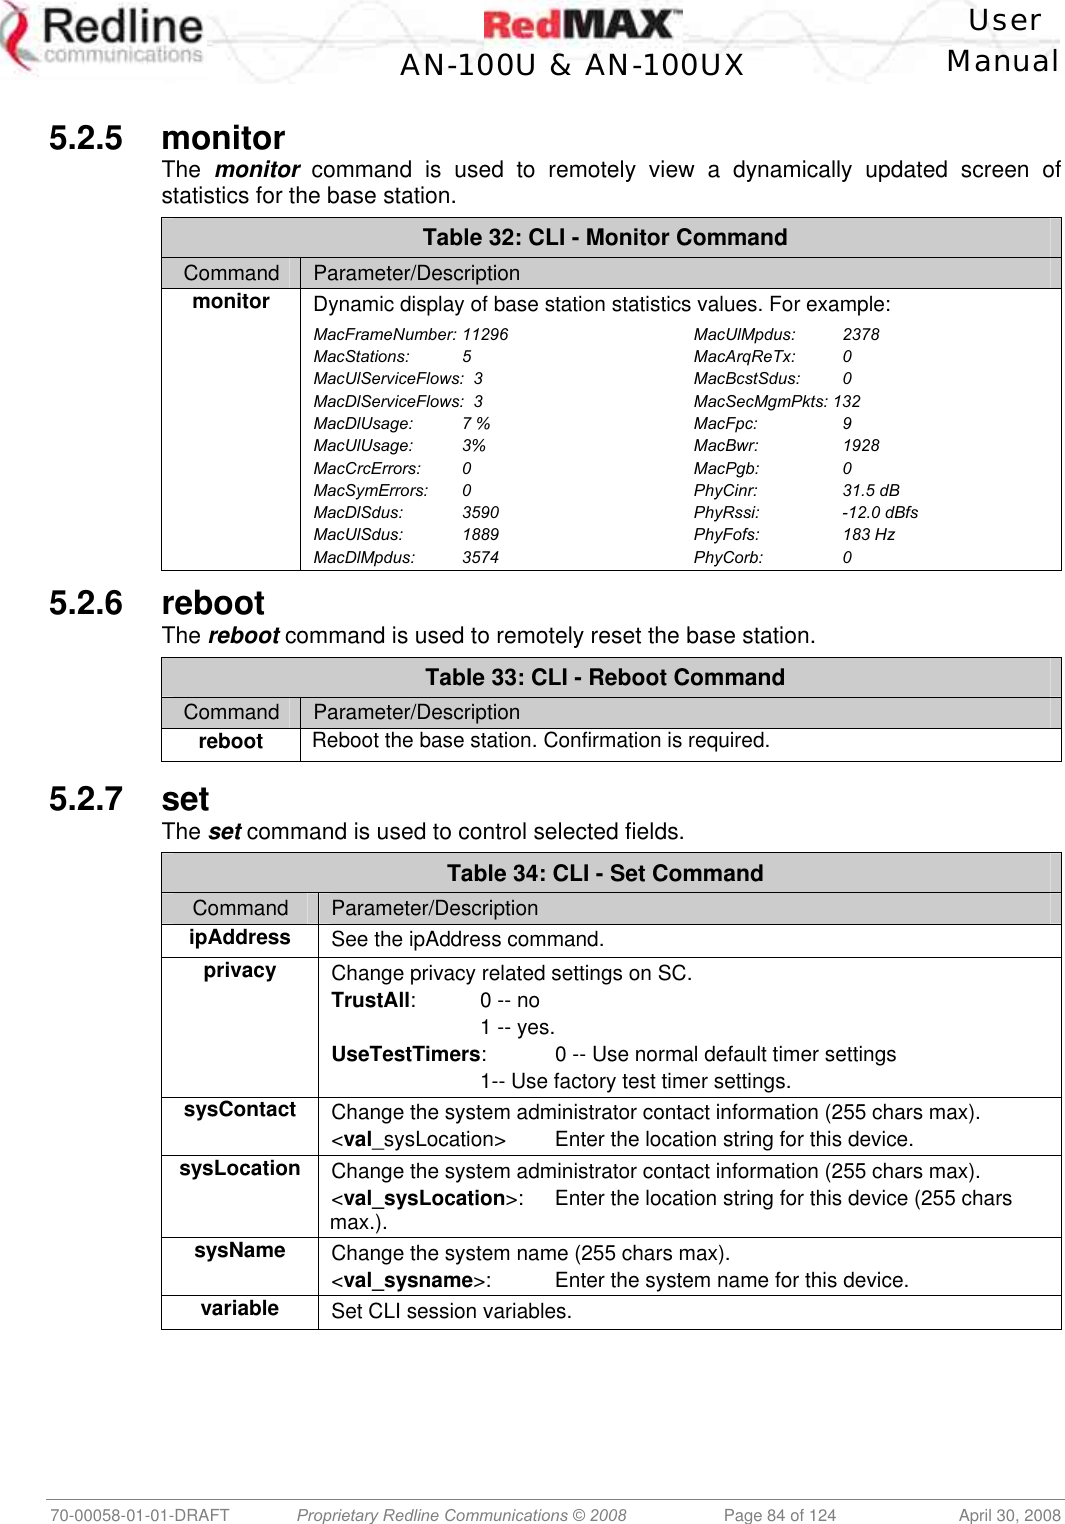    User  AN-100U &amp; AN-100UX Manual   70-00058-01-01-DRAFT  Proprietary Redline Communications © 2008   Page 84 of 124  April 30, 2008  5.2.5 monitor The  monitor command is used to remotely view a dynamically updated screen of statistics for the base station. Table 32: CLI - Monitor Command Command  Parameter/Description monitor Dynamic display of base station statistics values. For example:  MacFrameNumber: 11296 MacStations: 5 MacUlServiceFlows:  3 MacDlServiceFlows:  3 MacDlUsage:   7 % MacUlUsage: 3% MacCrcErrors: 0 MacSymErrors: 0 MacDlSdus: 3590 MacUlSdus:   1889 MacDlMpdus: 3574 MacUlMpdus: 2378 MacArqReTx: 0 MacBcstSdus: 0 MacSecMgmPkts: 132 MacFpc:   9 MacBwr:   1928 MacPgb:   0 PhyCinr:   31.5 dB PhyRssi:   -12.0 dBfs PhyFofs:   183 Hz PhyCorb:   0 5.2.6 reboot The reboot command is used to remotely reset the base station. Table 33: CLI - Reboot Command Command  Parameter/Description reboot Reboot the base station. Confirmation is required.  5.2.7 set The set command is used to control selected fields. Table 34: CLI - Set Command Command  Parameter/Description ipAddress See the ipAddress command. privacy  Change privacy related settings on SC. TrustAll:  0 -- no     1 -- yes. UseTestTimers:  0 -- Use normal default timer settings     1-- Use factory test timer settings. sysContact  Change the system administrator contact information (255 chars max). &lt;val_sysLocation&gt;  Enter the location string for this device. sysLocation  Change the system administrator contact information (255 chars max). &lt;val_sysLocation&gt;:  Enter the location string for this device (255 chars max.). sysName  Change the system name (255 chars max). &lt;val_sysname&gt;:  Enter the system name for this device. variable  Set CLI session variables.  